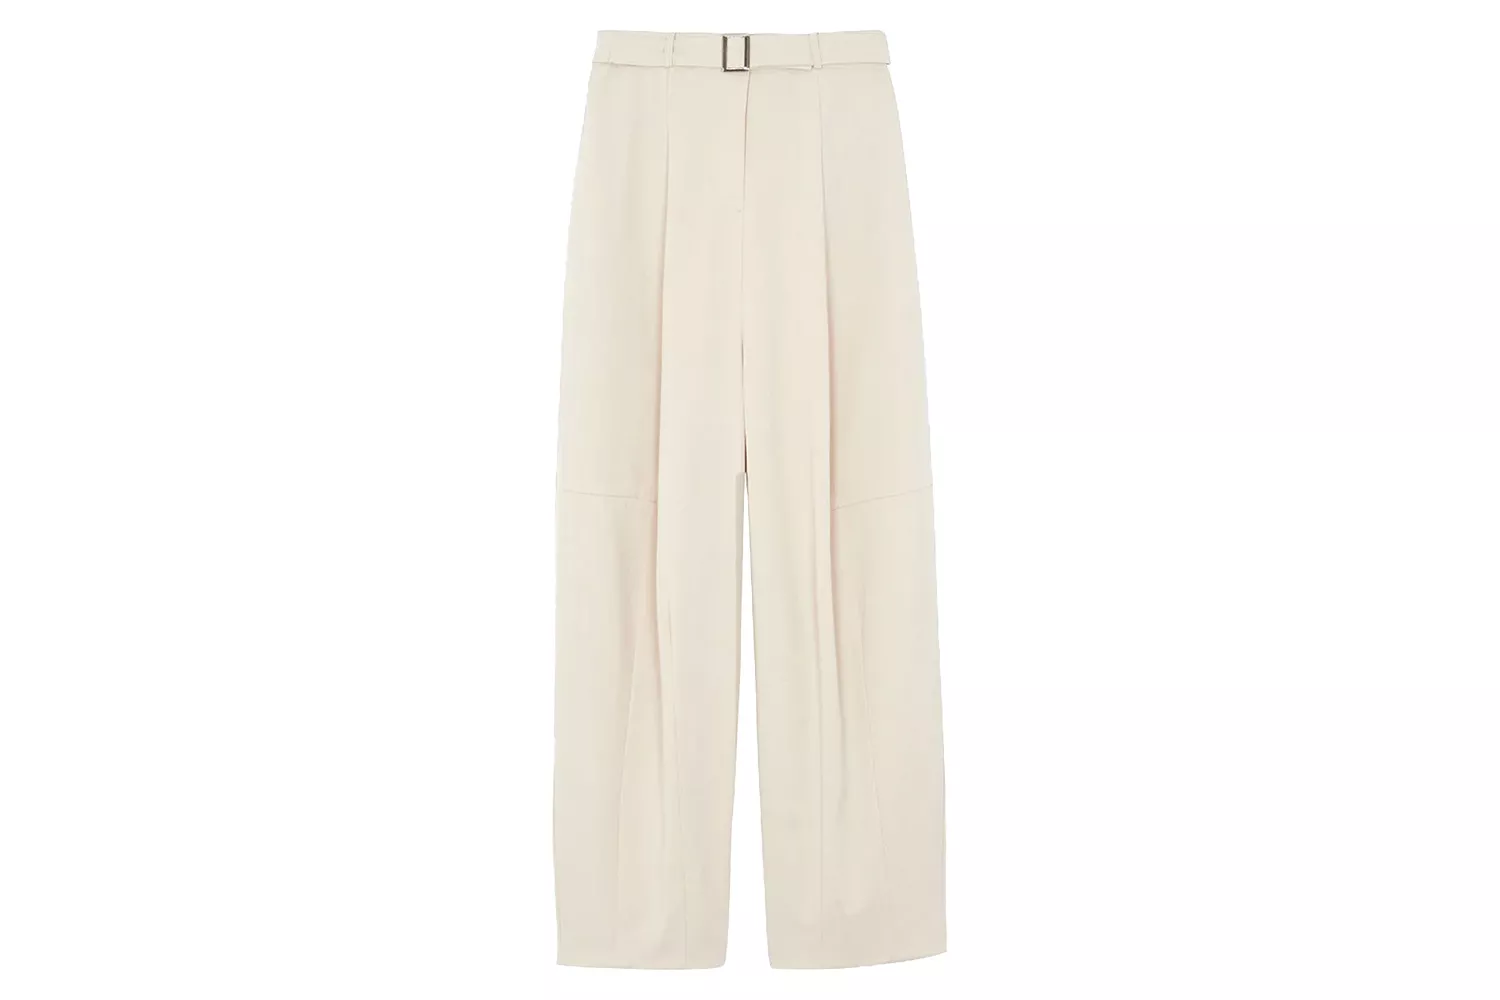 The Frankie Shop Mia Belted Pants